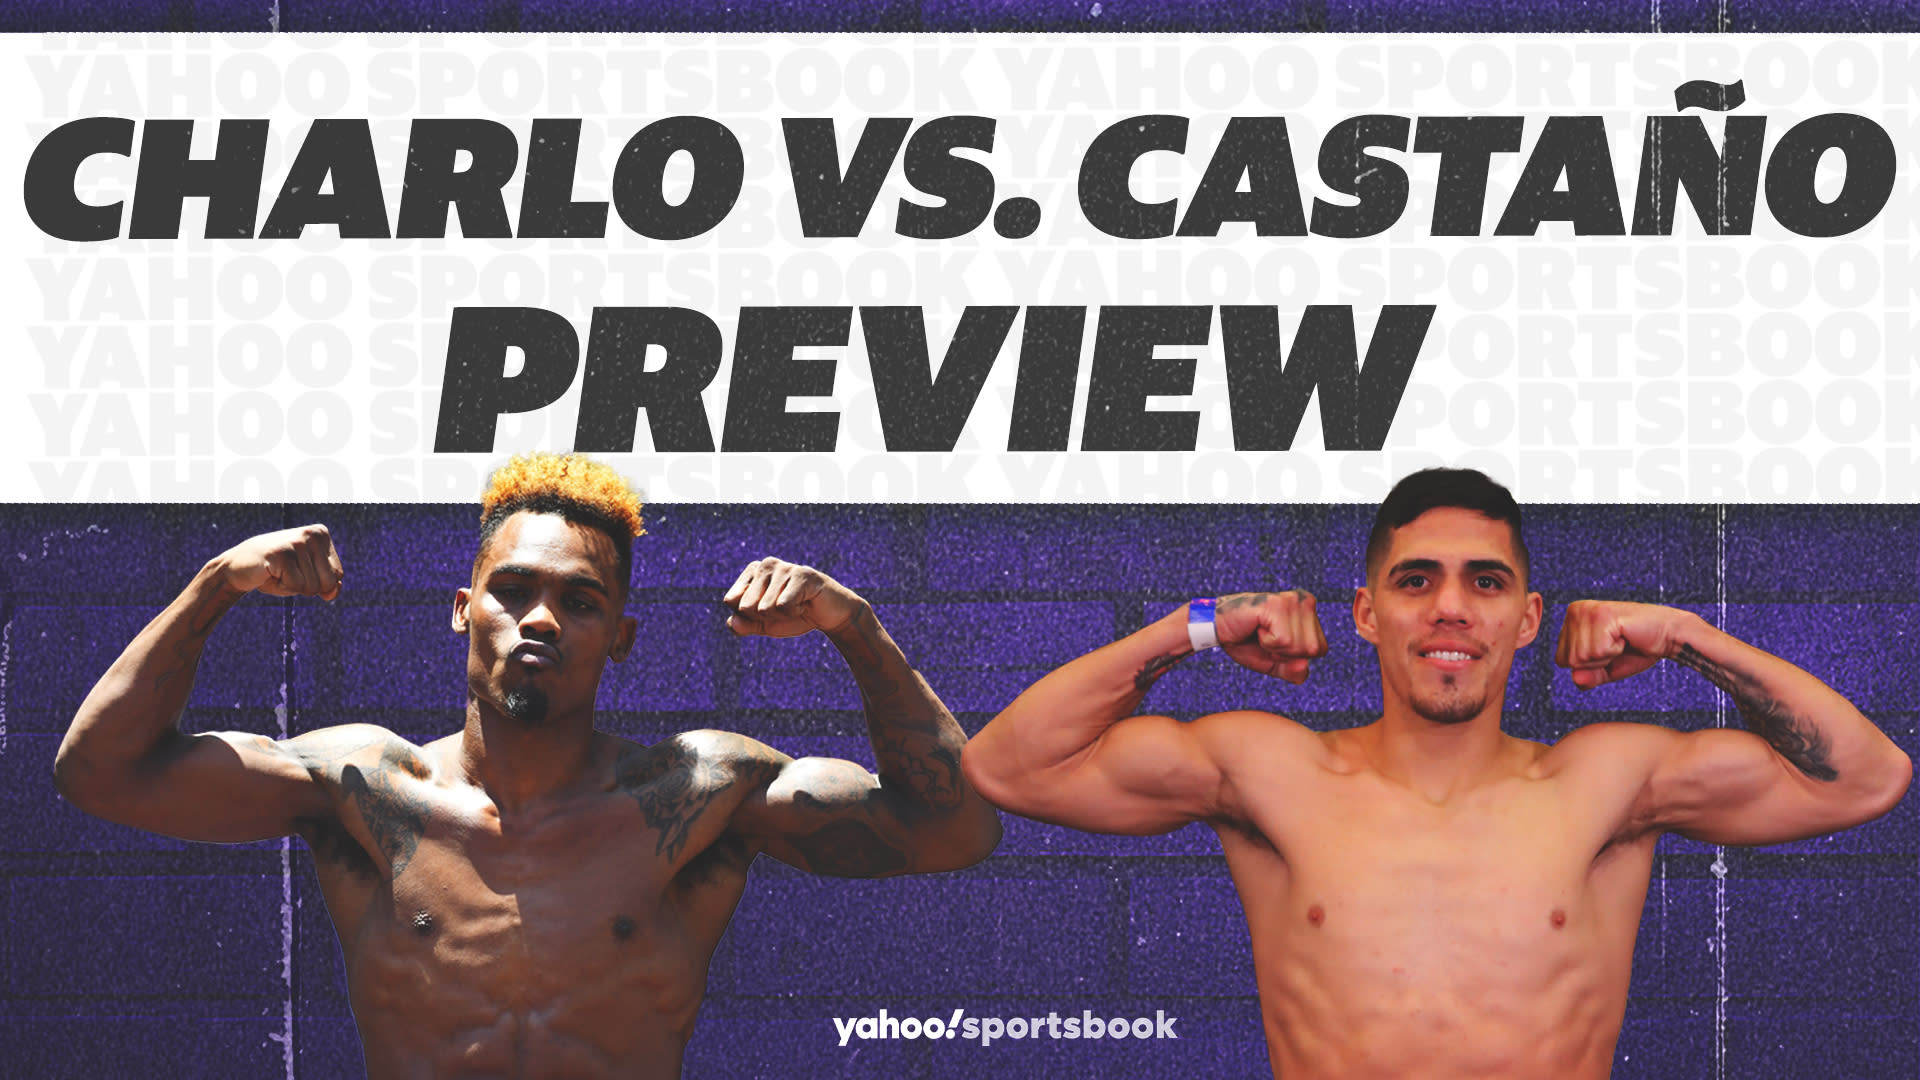 With massive chip on his shoulder, Brian Castaño vows to KO Jermell Charlo in rematch